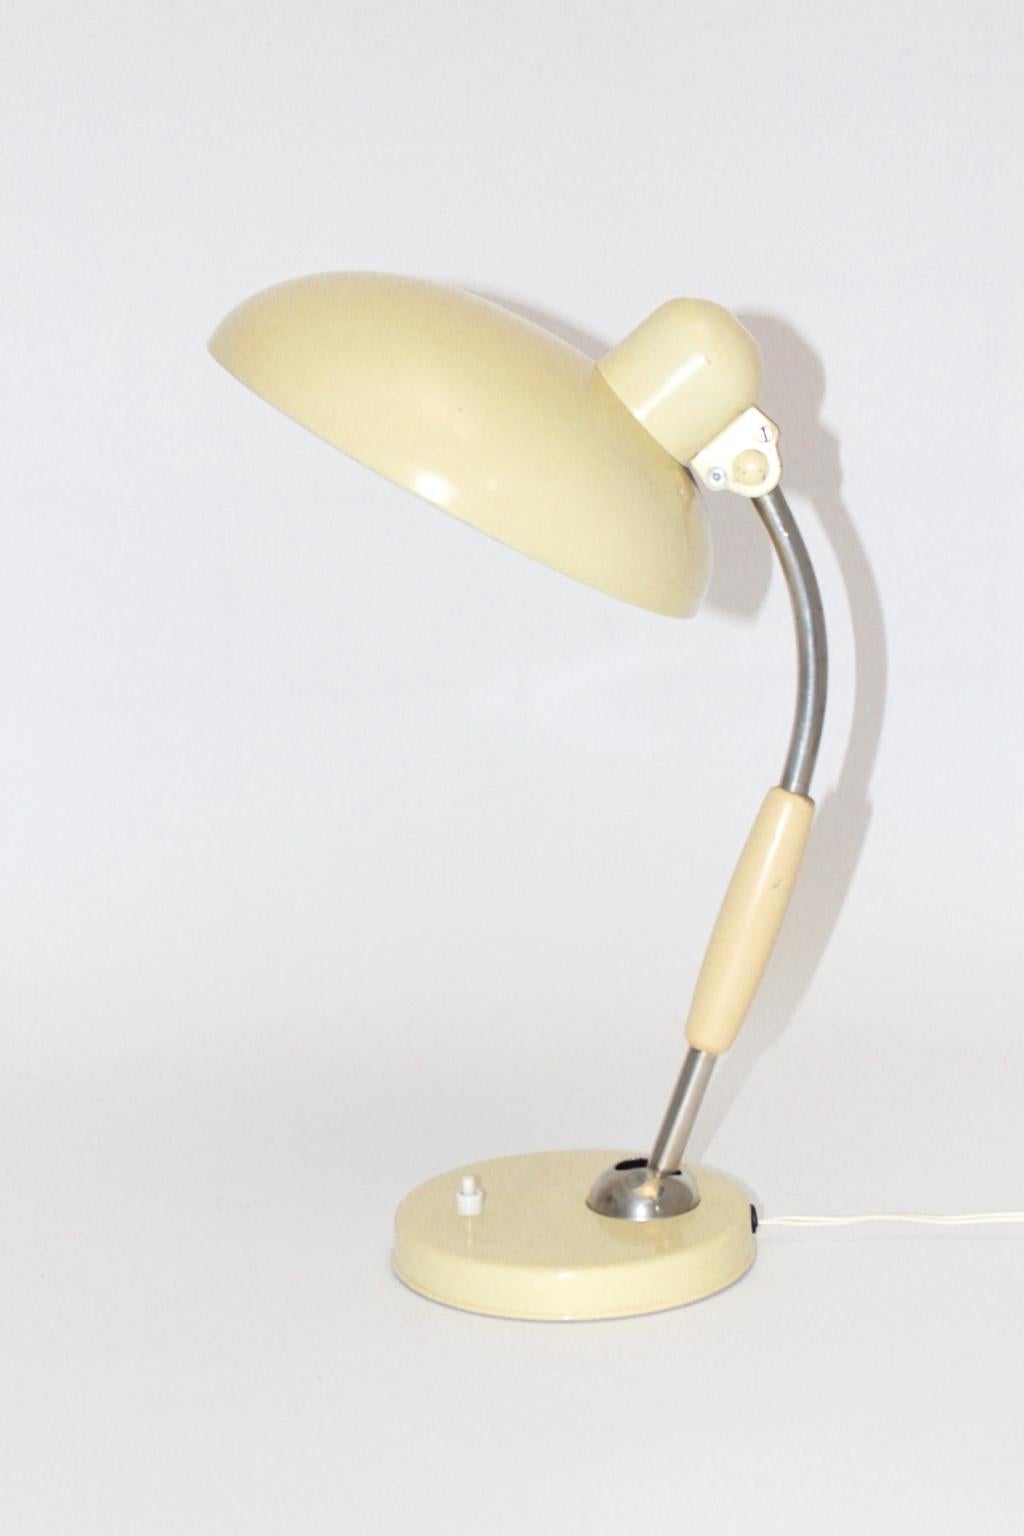 This ivory colored table lamp was designed by Christian Dell 1933 and produced by Koranda, Germany, circa 1950. Furthermore the table lamp was made of metal and wooden parts. Also the table lamp features joints, which allow to swivel and to